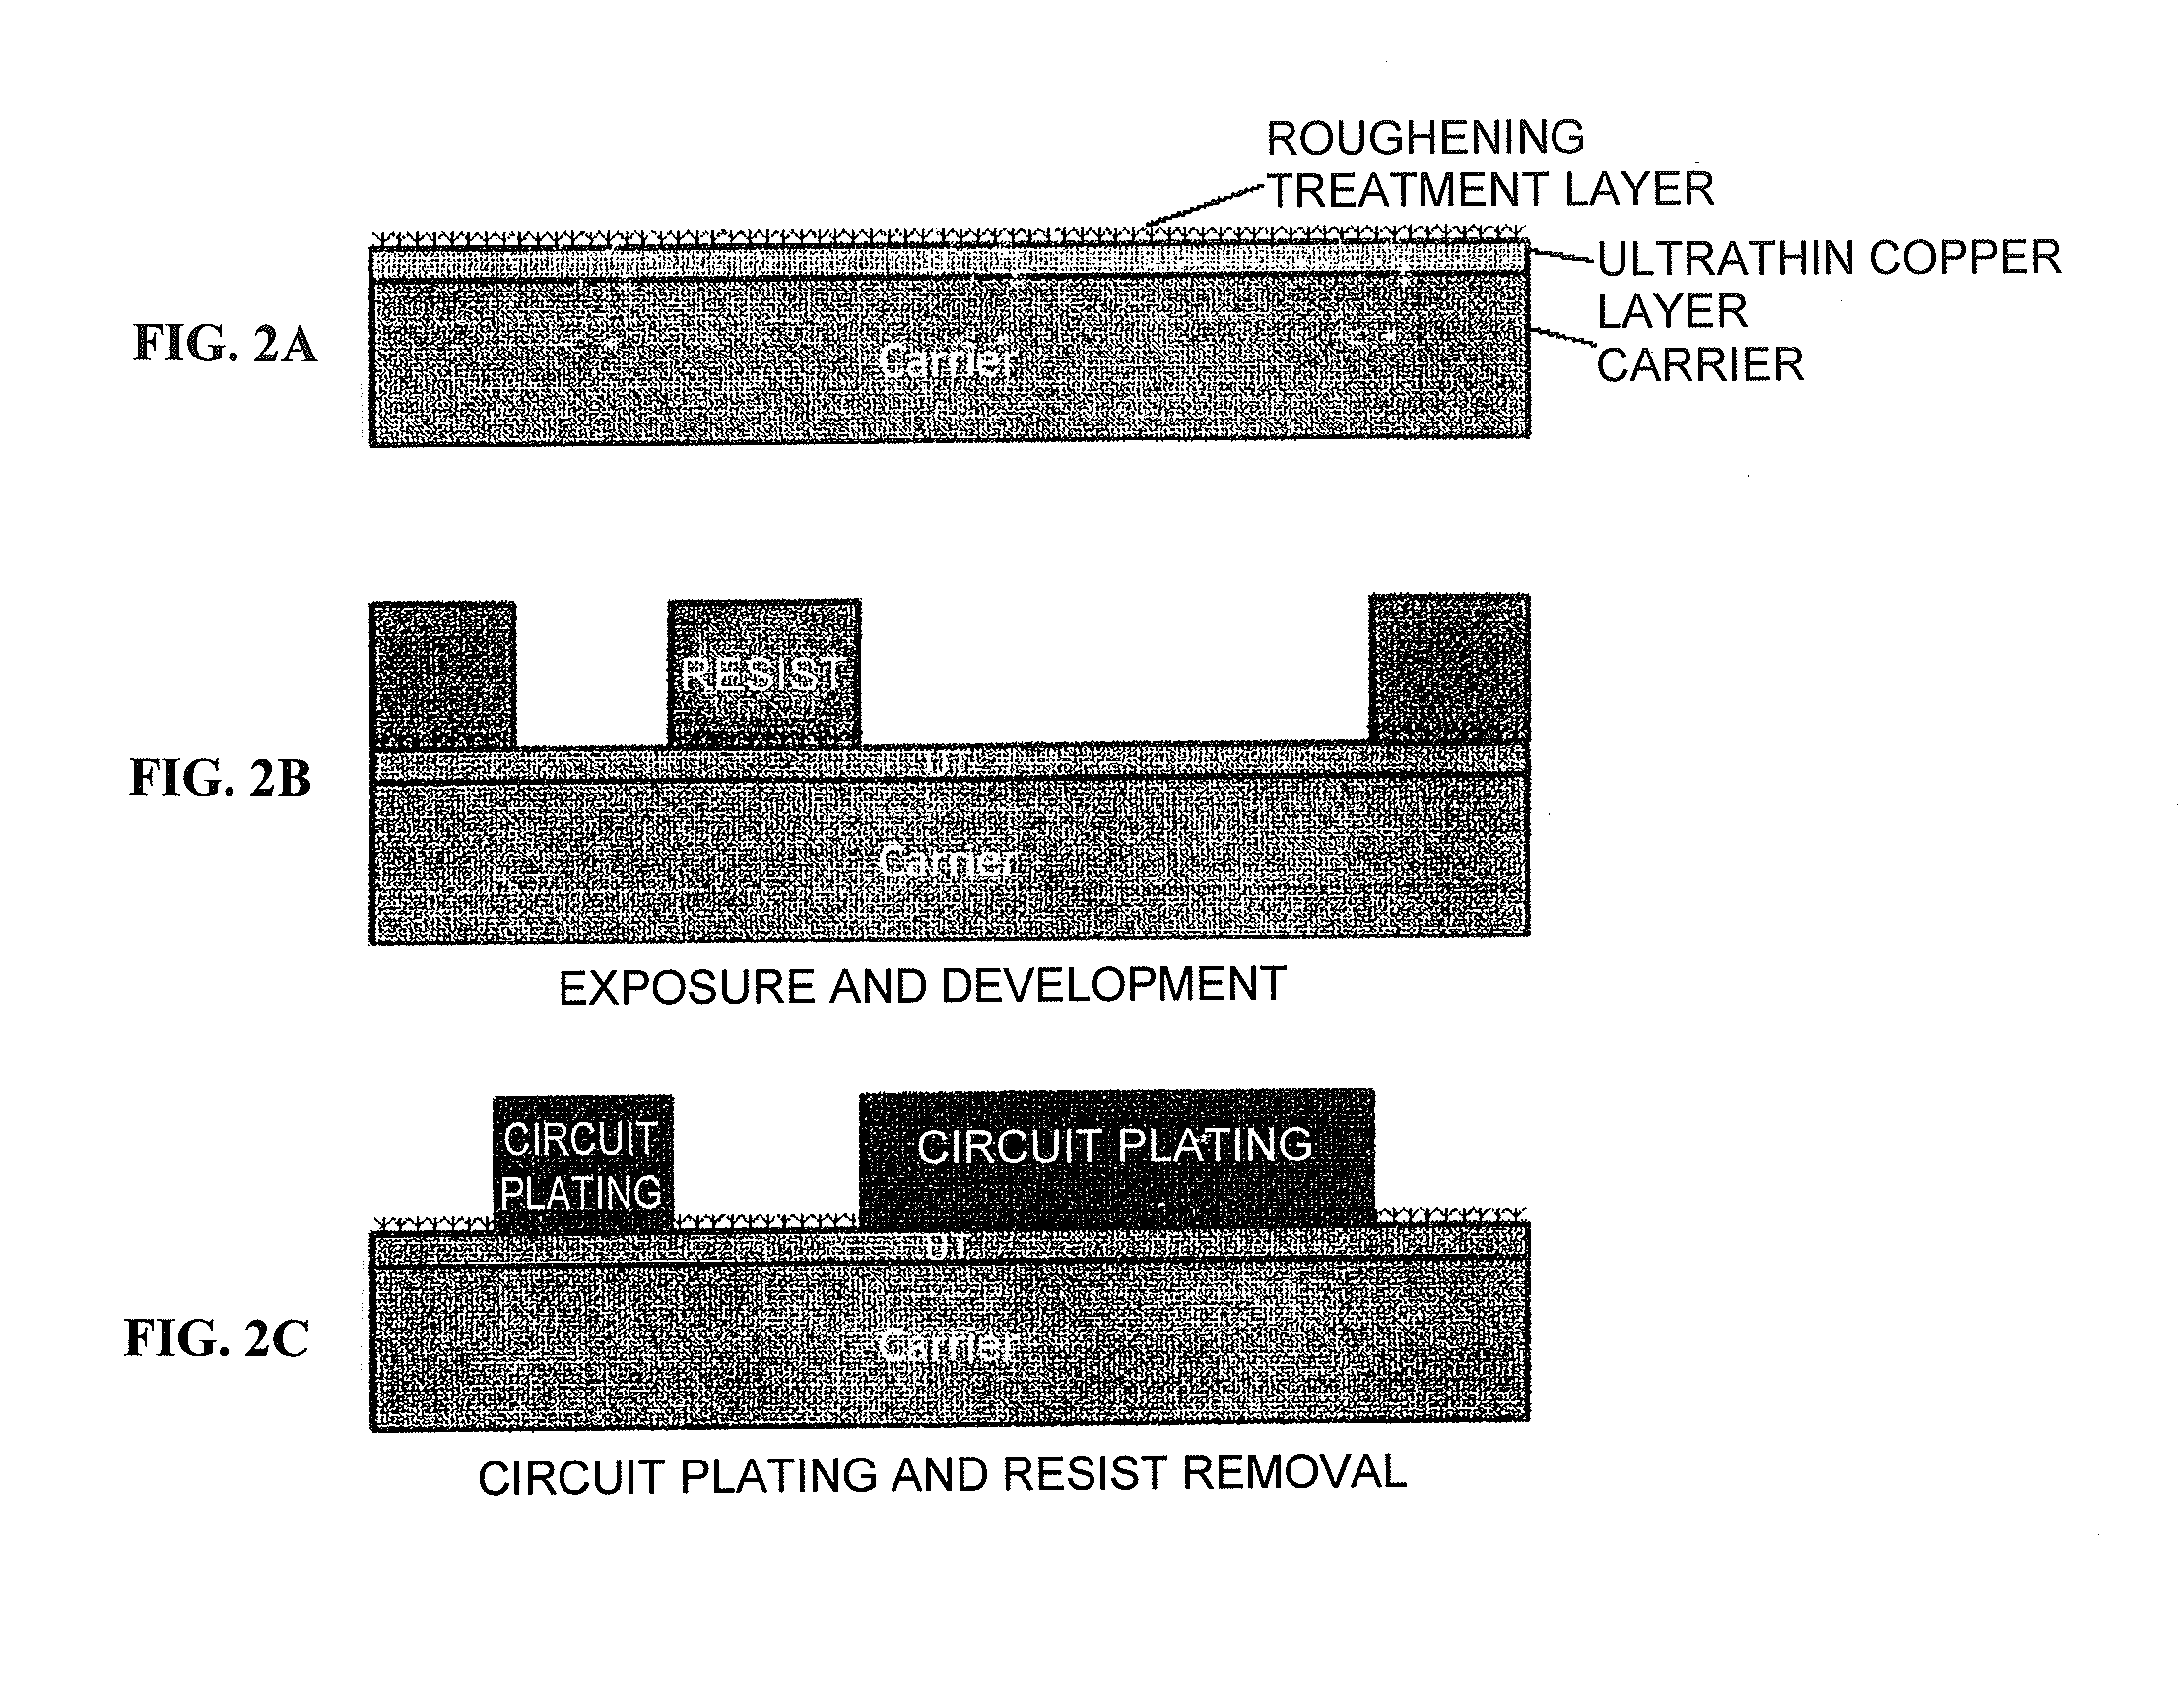 Copper foil provided with carrier, laminate, printed wiring board, electronic device, and method for fabricating printed wiring board